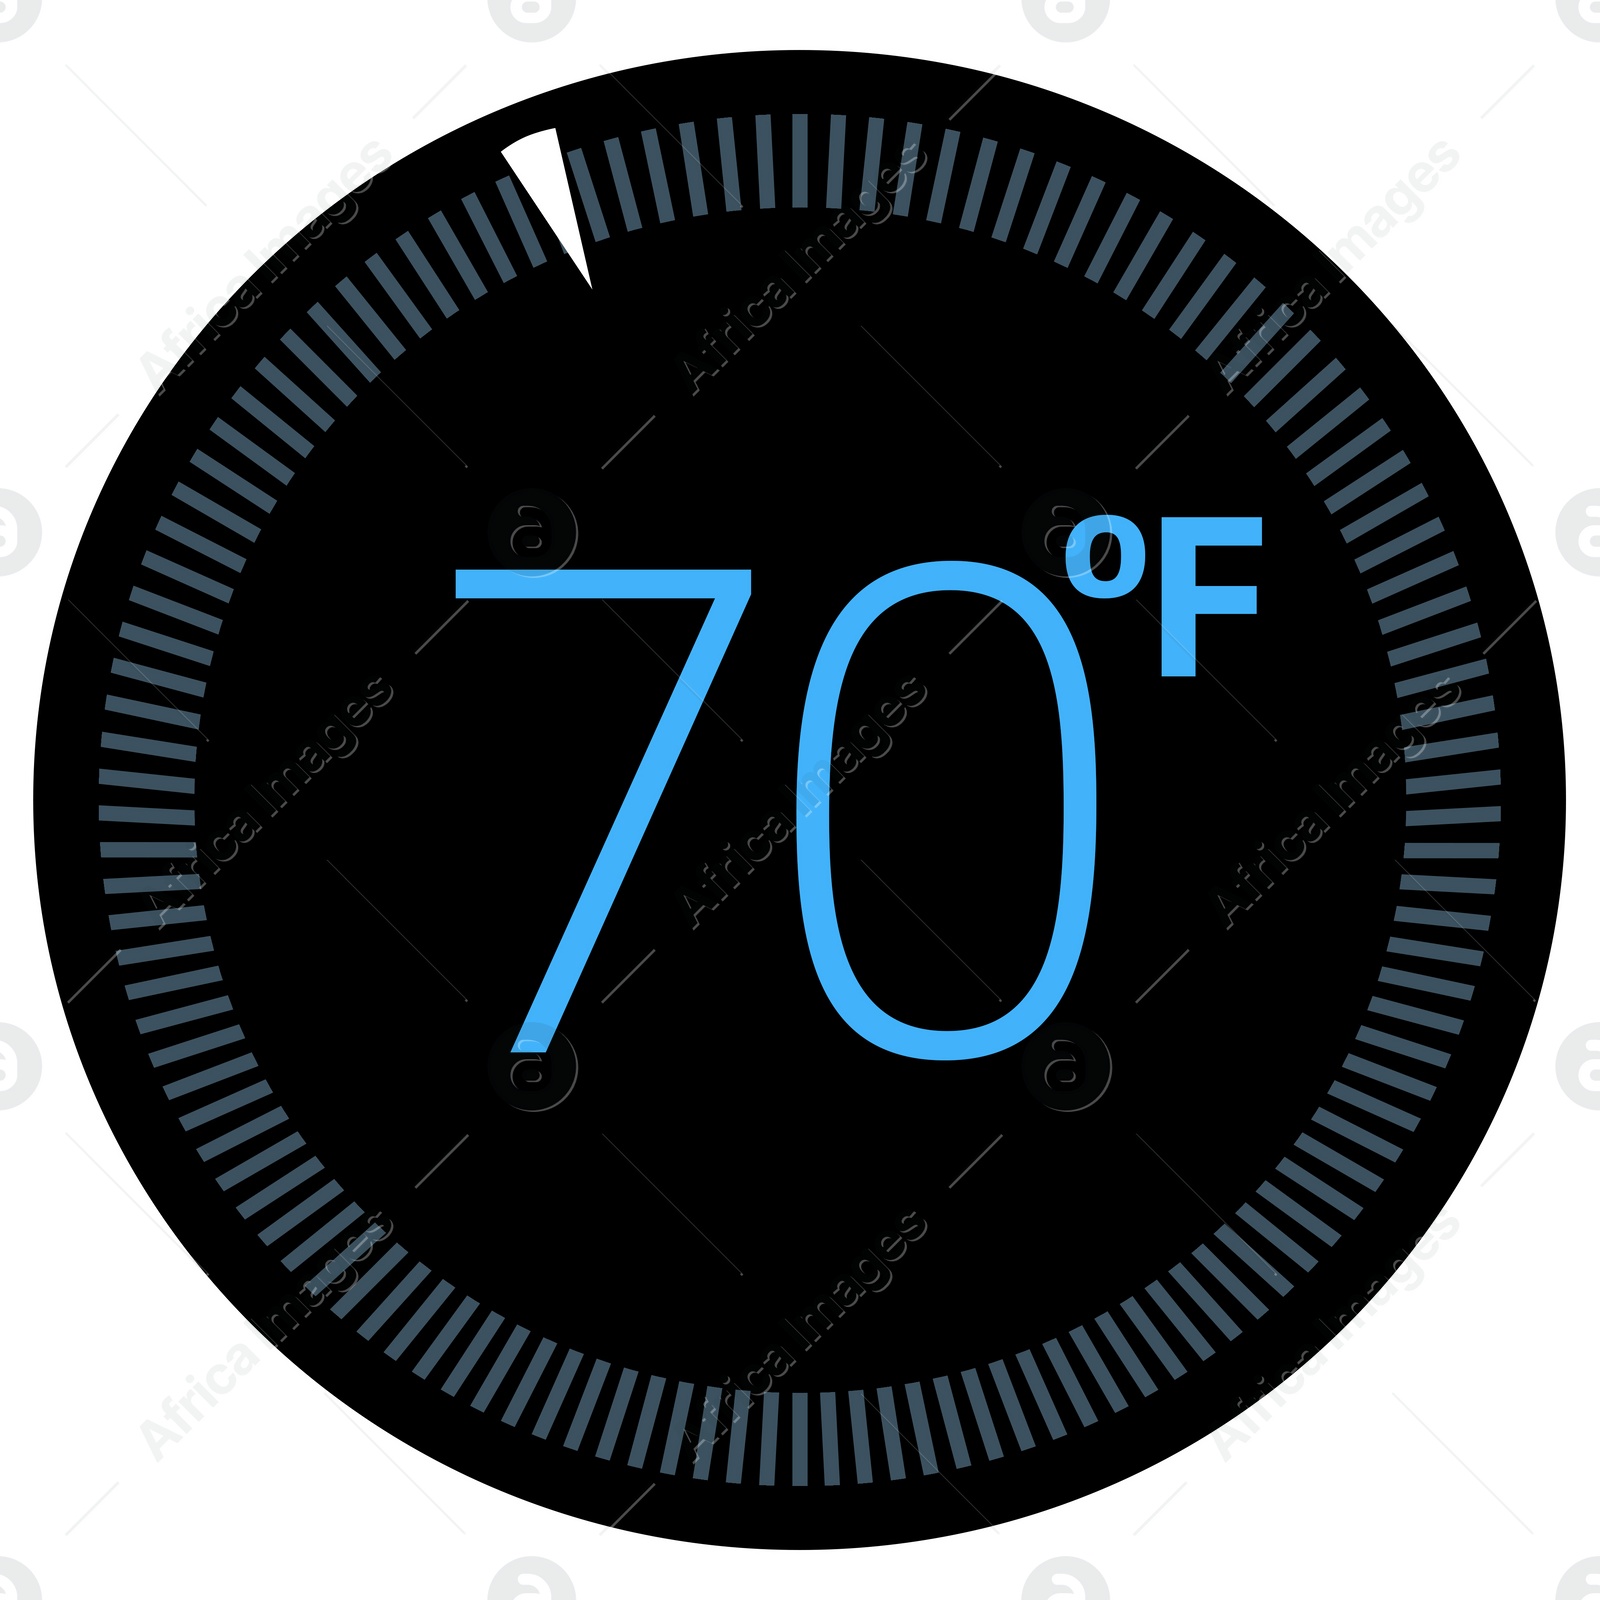 Illustration of Thermostat showing ambient temperature in Fahrenheit scale. Device display on white background